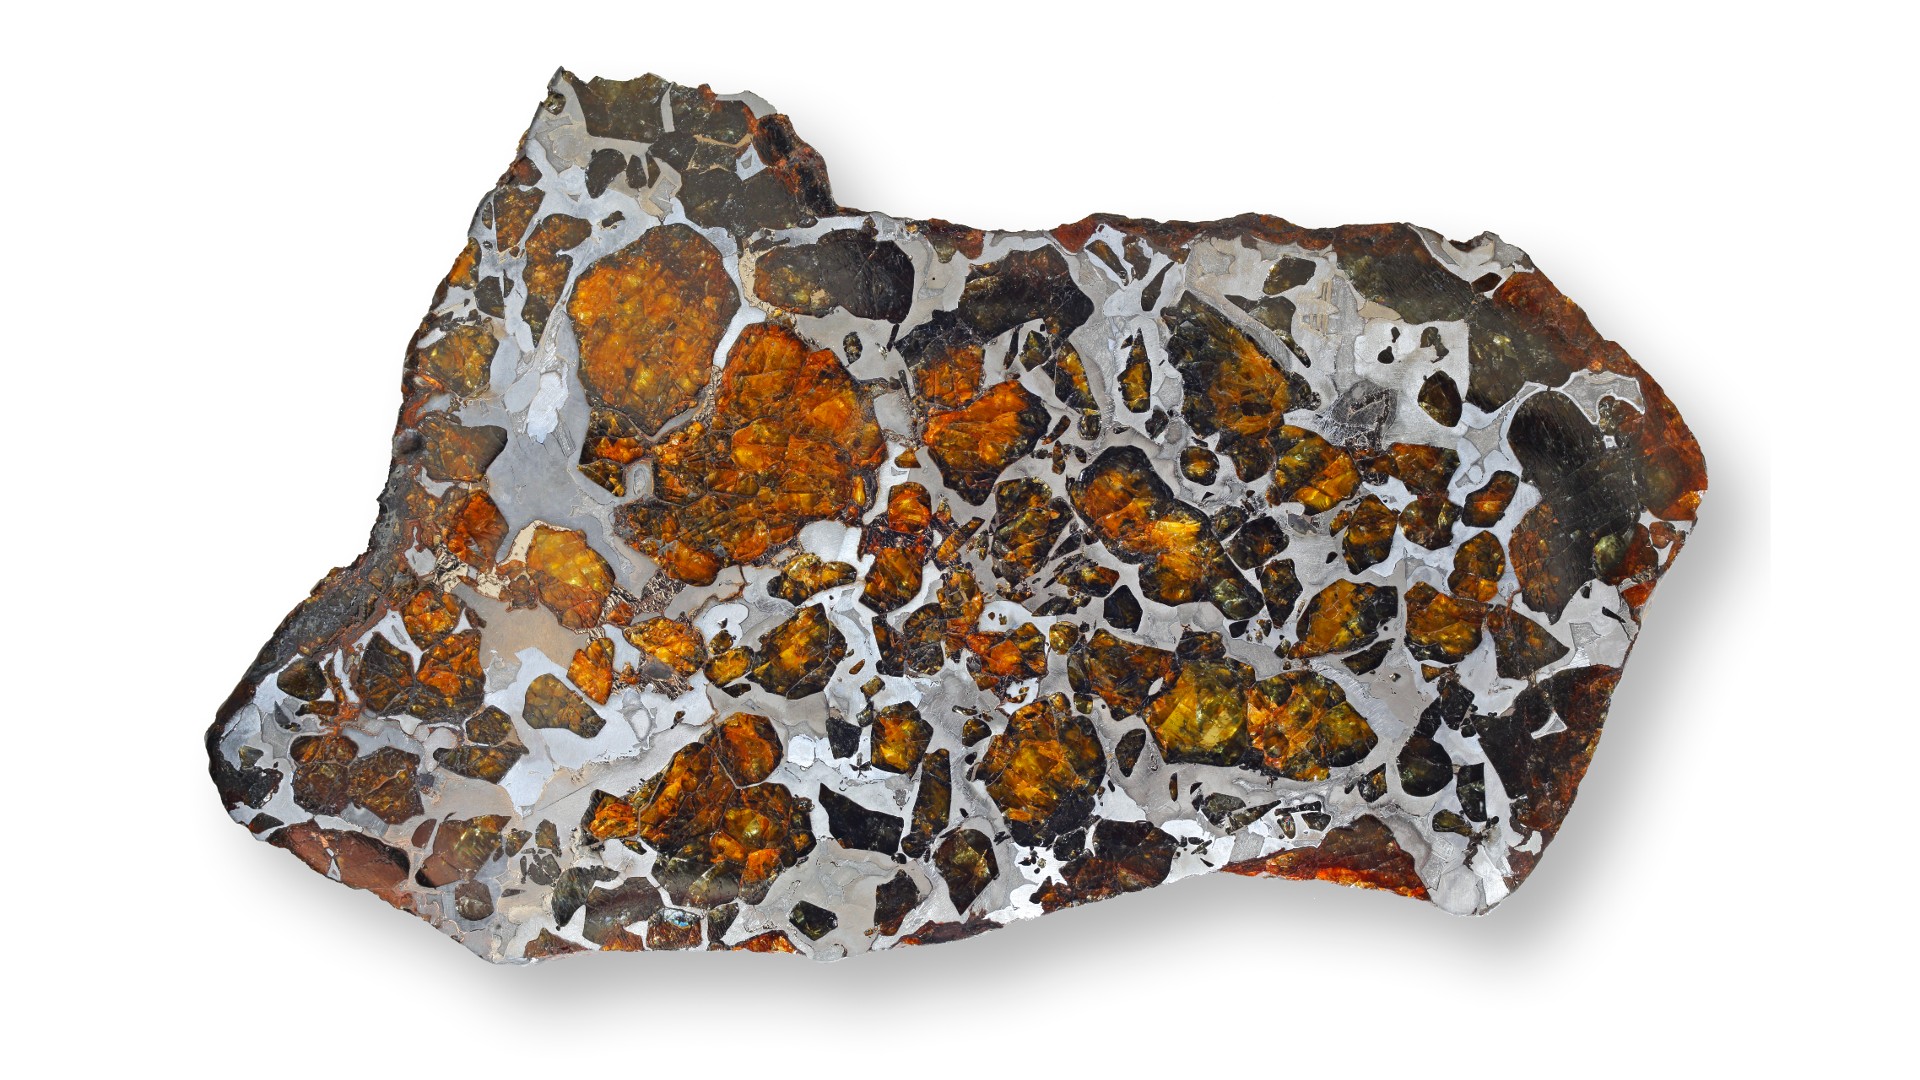 Stony iron meteorite (Pallasit) and Olivinen and visible Widmanstaetten figures. Size: 15cm There are many amber spots surrounded by black and white.